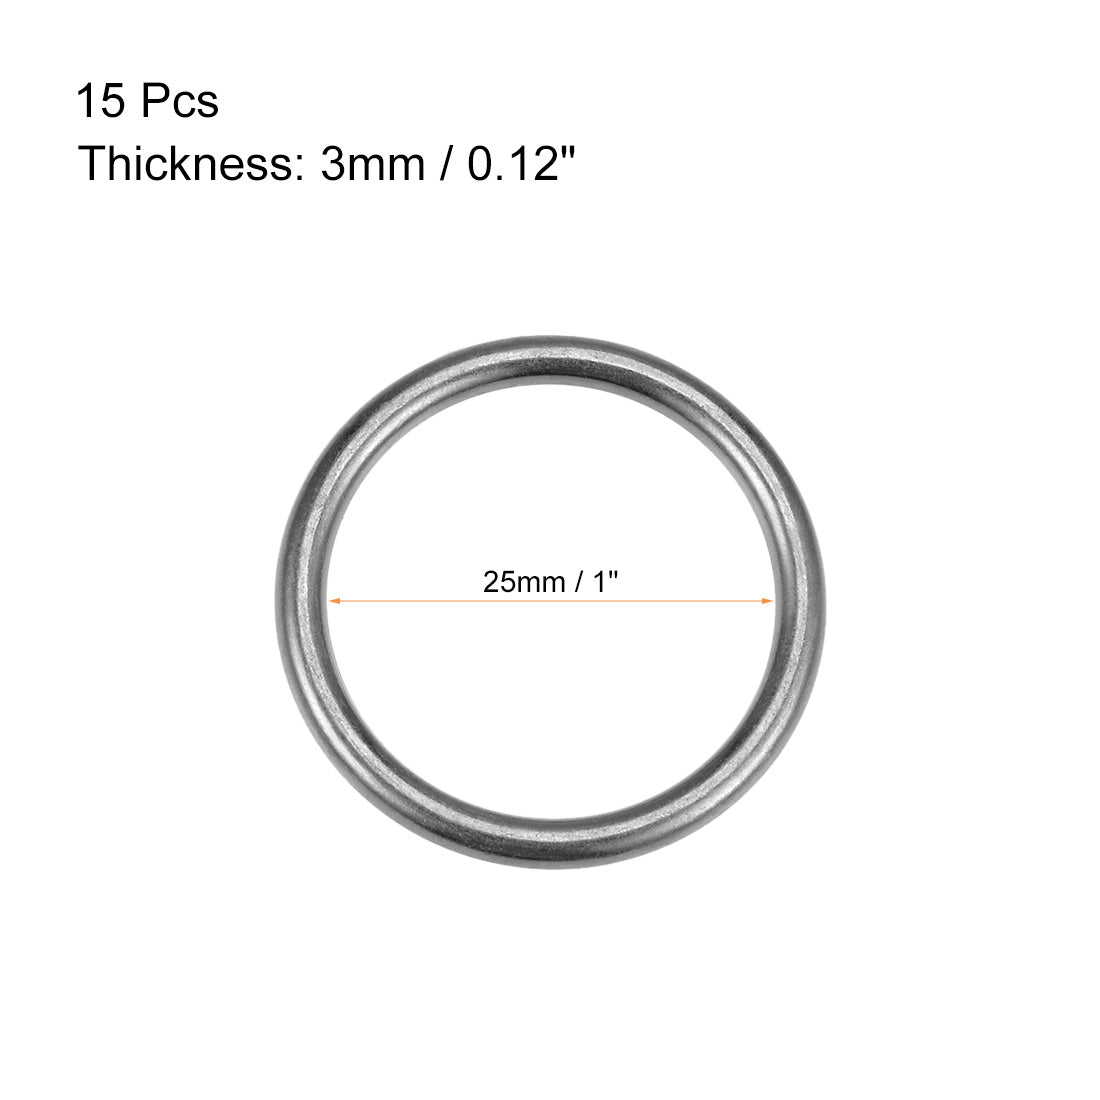 uxcell Uxcell O Ring Buckle 25mm(1") ID 3mm Thickness Zinc Alloy O-Rings for Hardware Bags Belts Craft DIY Accessories, Black 15pcs